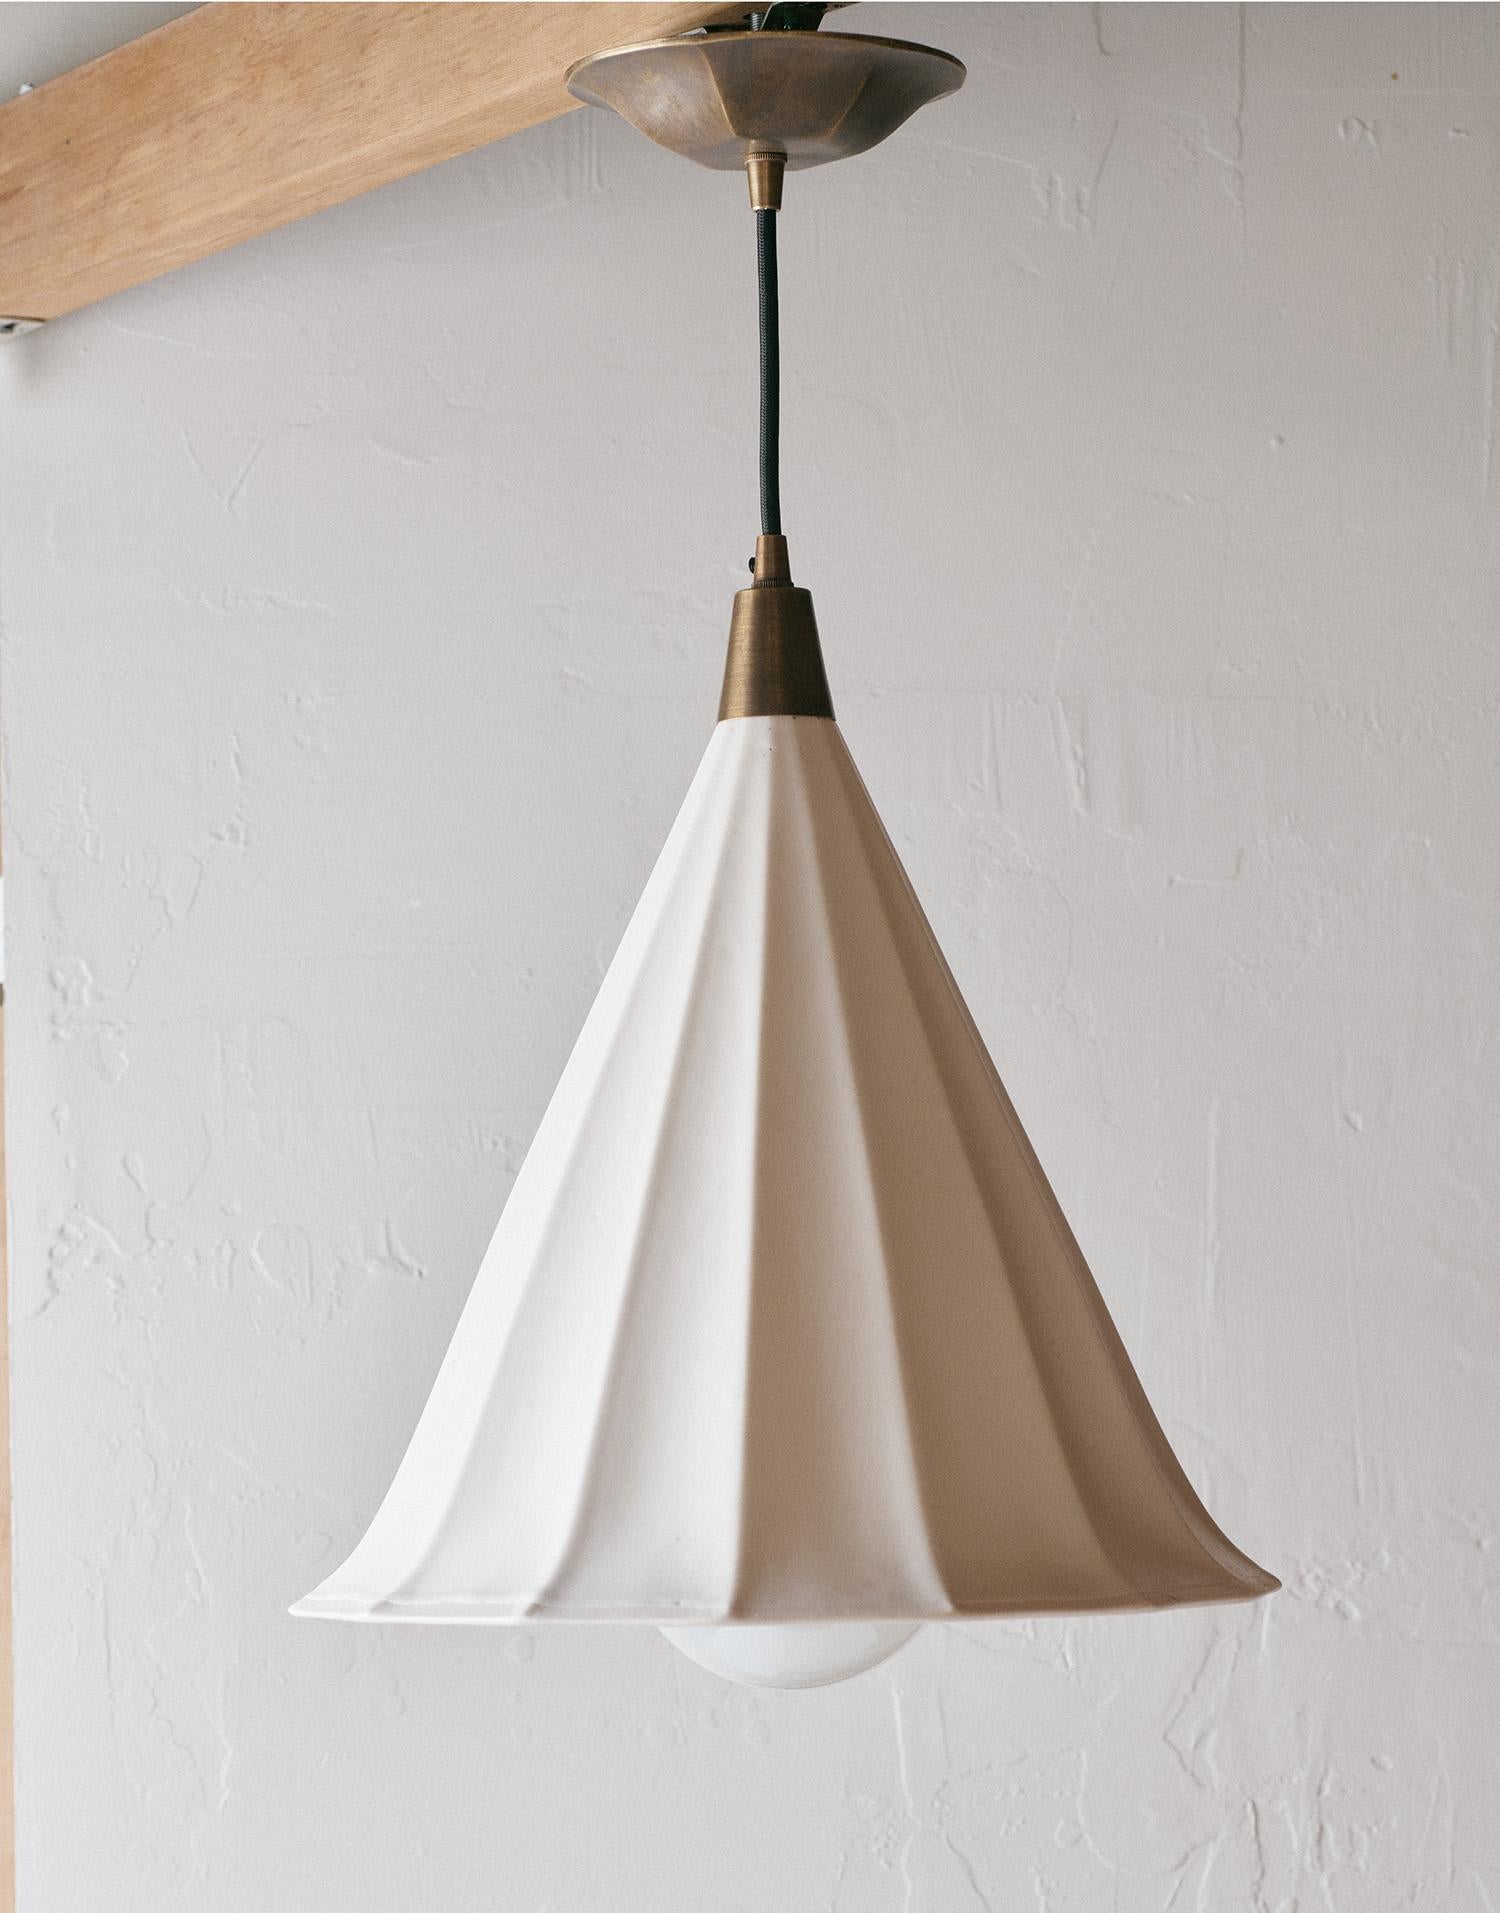 Classic, elegant, with a perfectly imperfect touch. On their own they make a statement with their gentle flared bottoms and deep fluting. Hang in multiples for extra oomph. These cast porcelain pendants include brass ceiling cap and hardware with